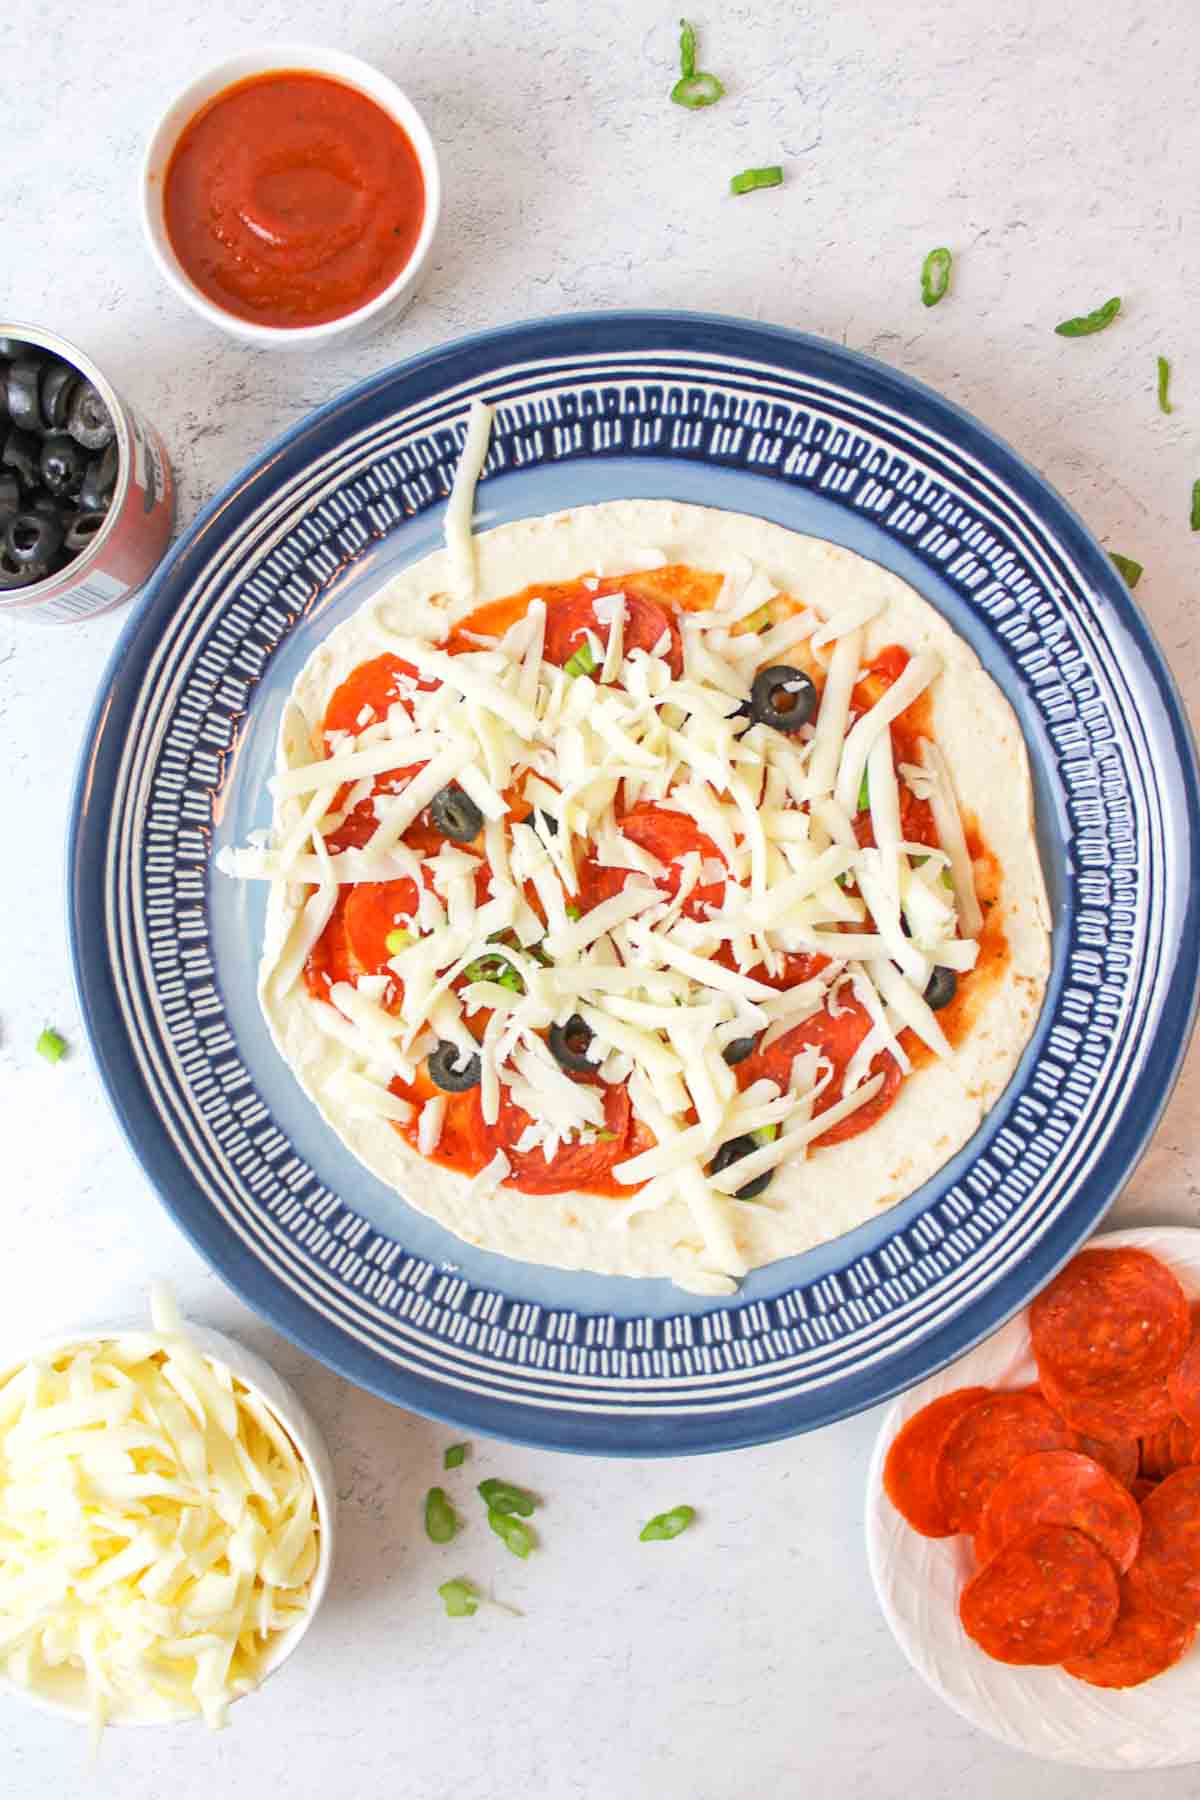 a tortilla pizza with sauce and toppings under shredded cheese on a blue plate